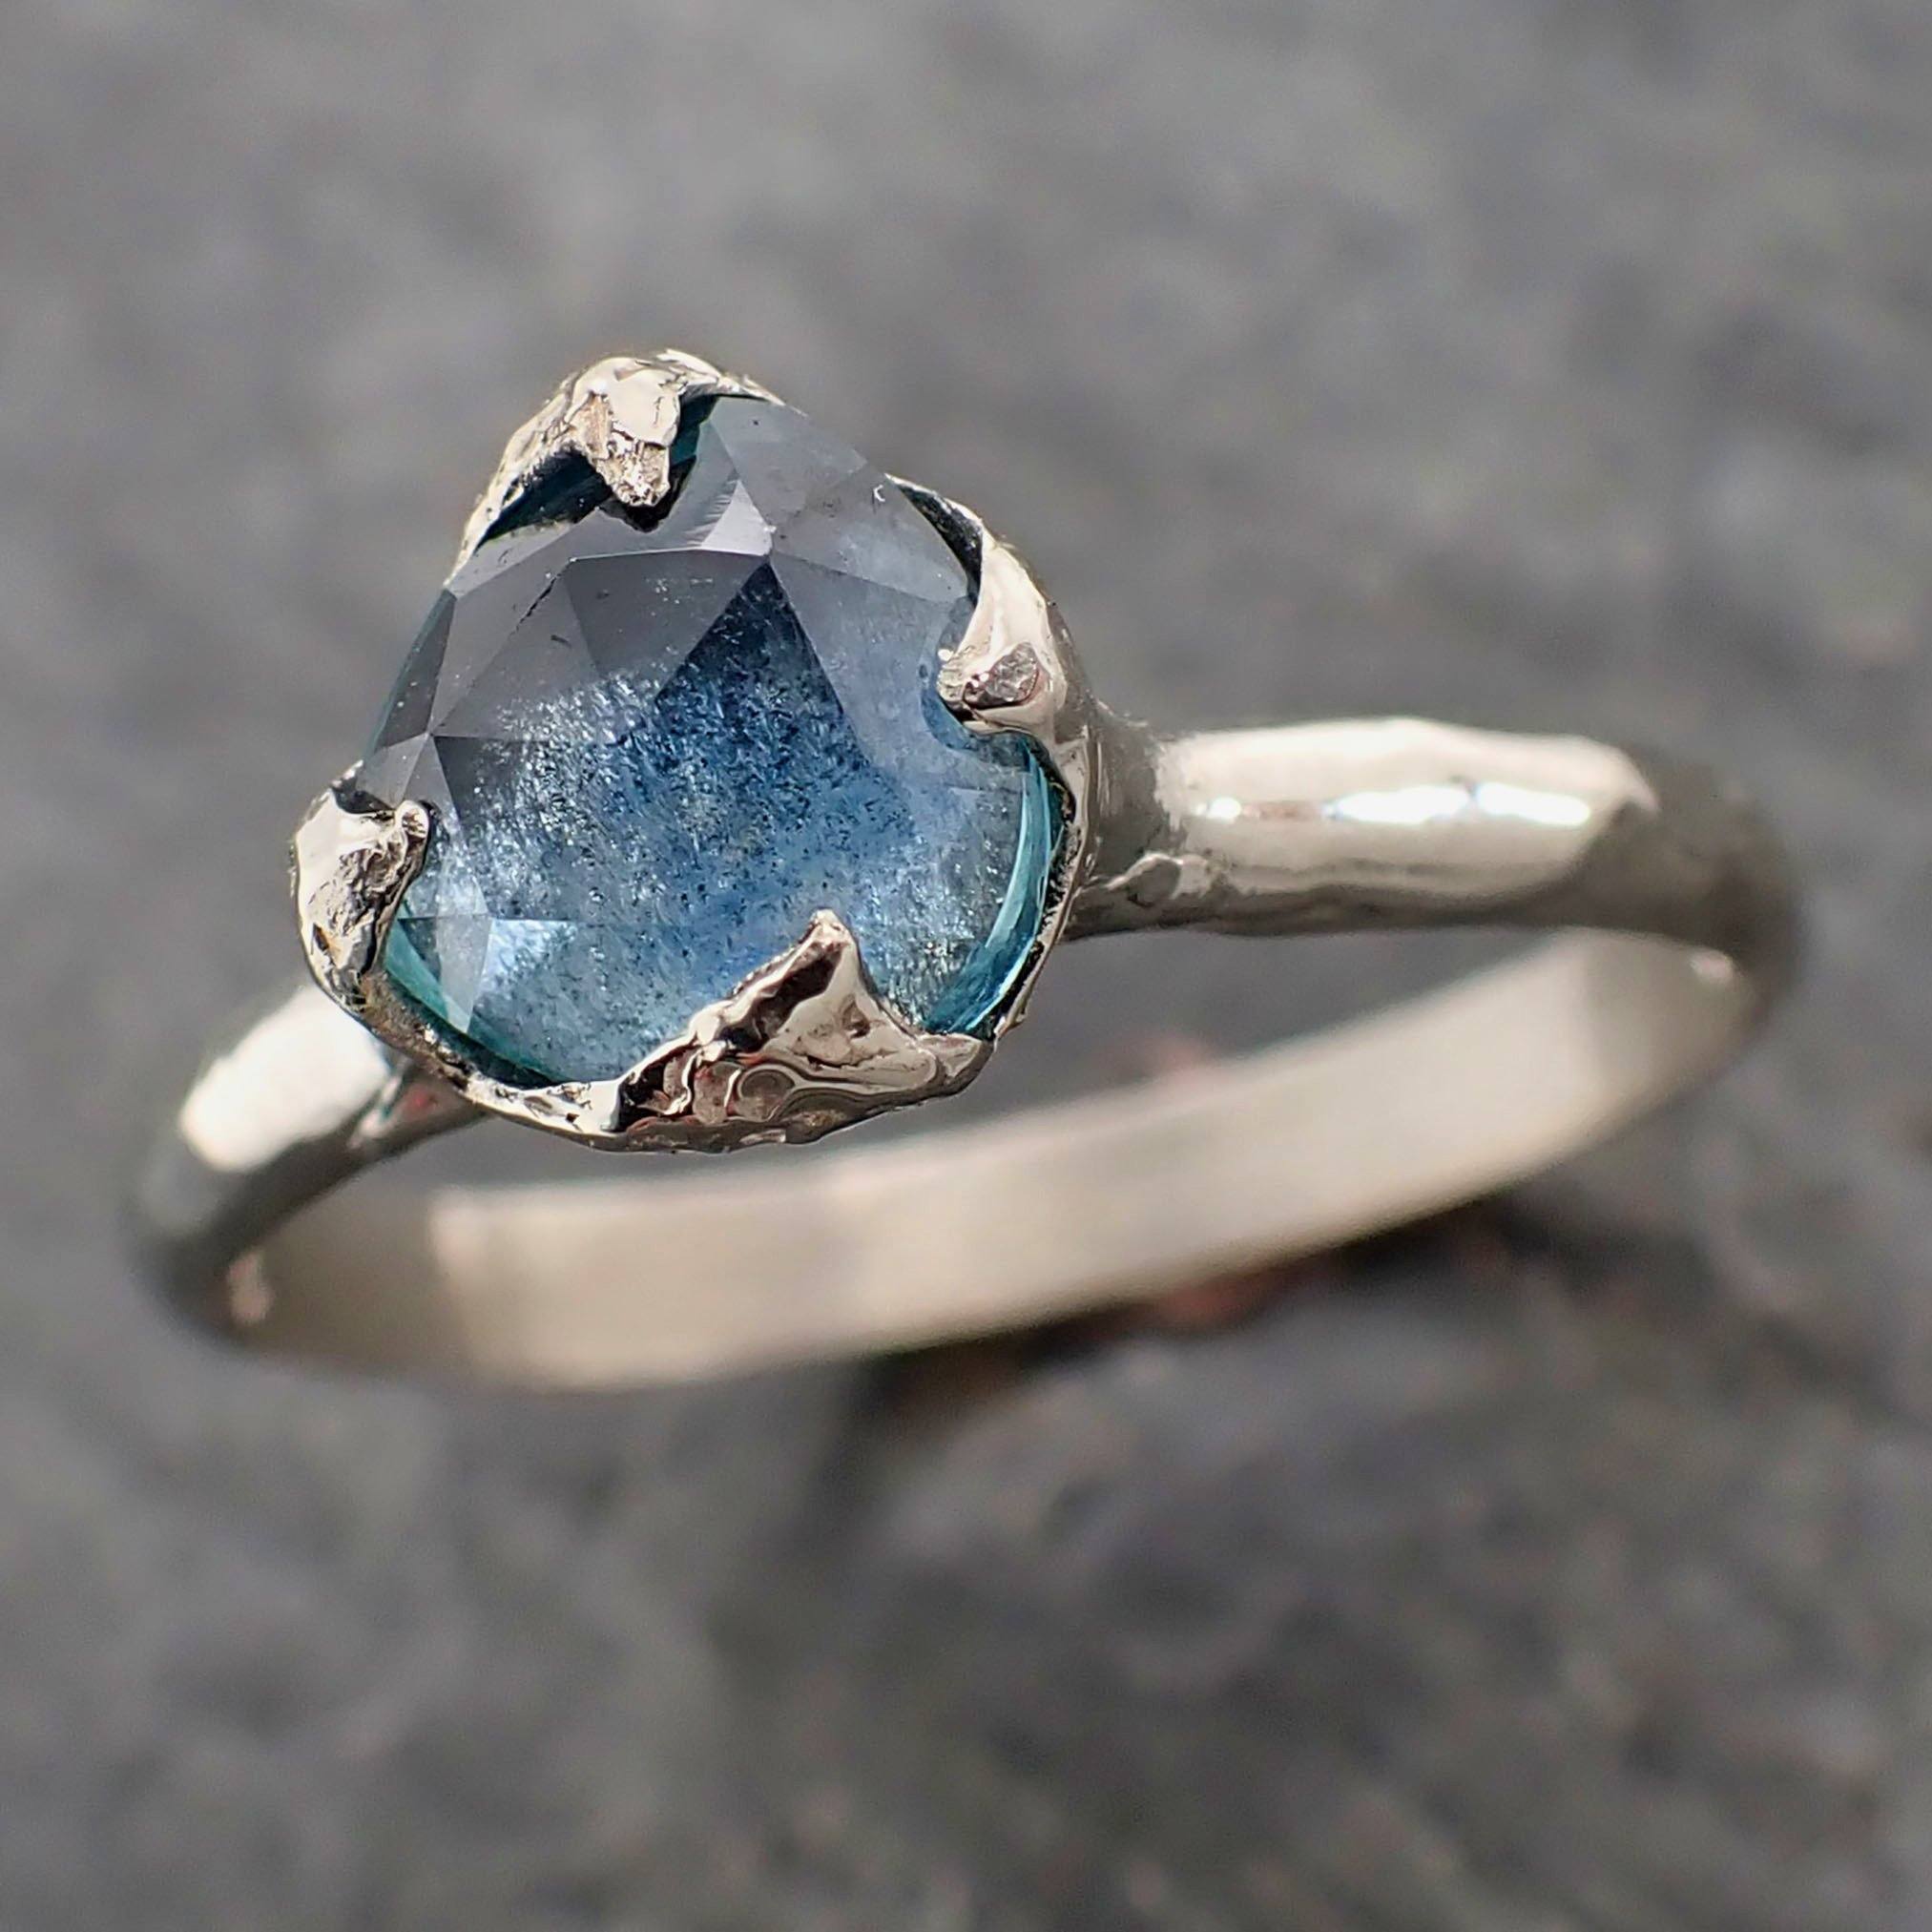 fancy cut montana blue sapphire 14k white gold solitaire ring gold gemstone engagement ring 2157 Alternative Engagement